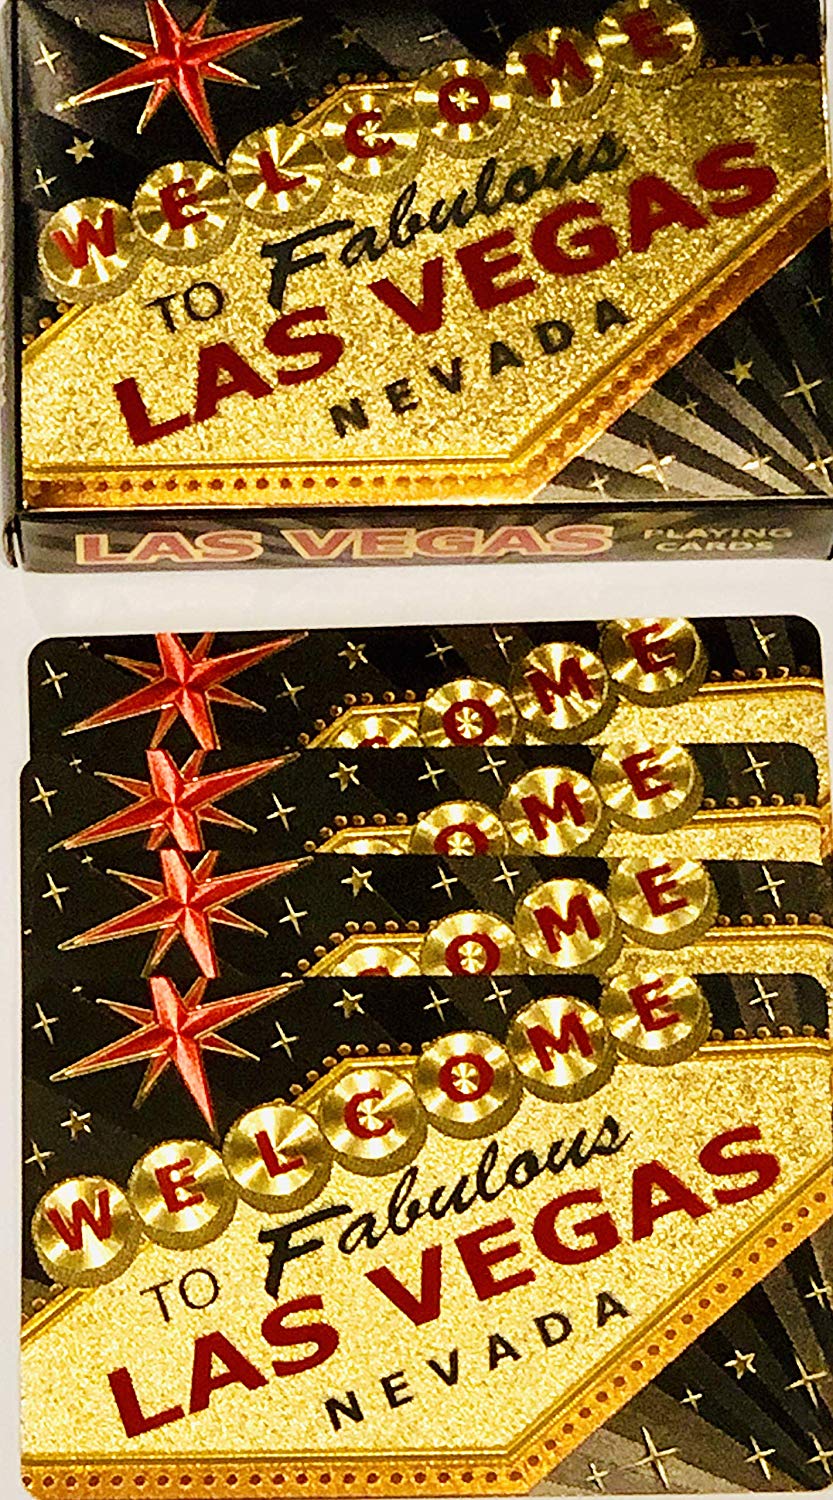 Welcome to Fabulous Las Vegas Black Foil Playing Cards